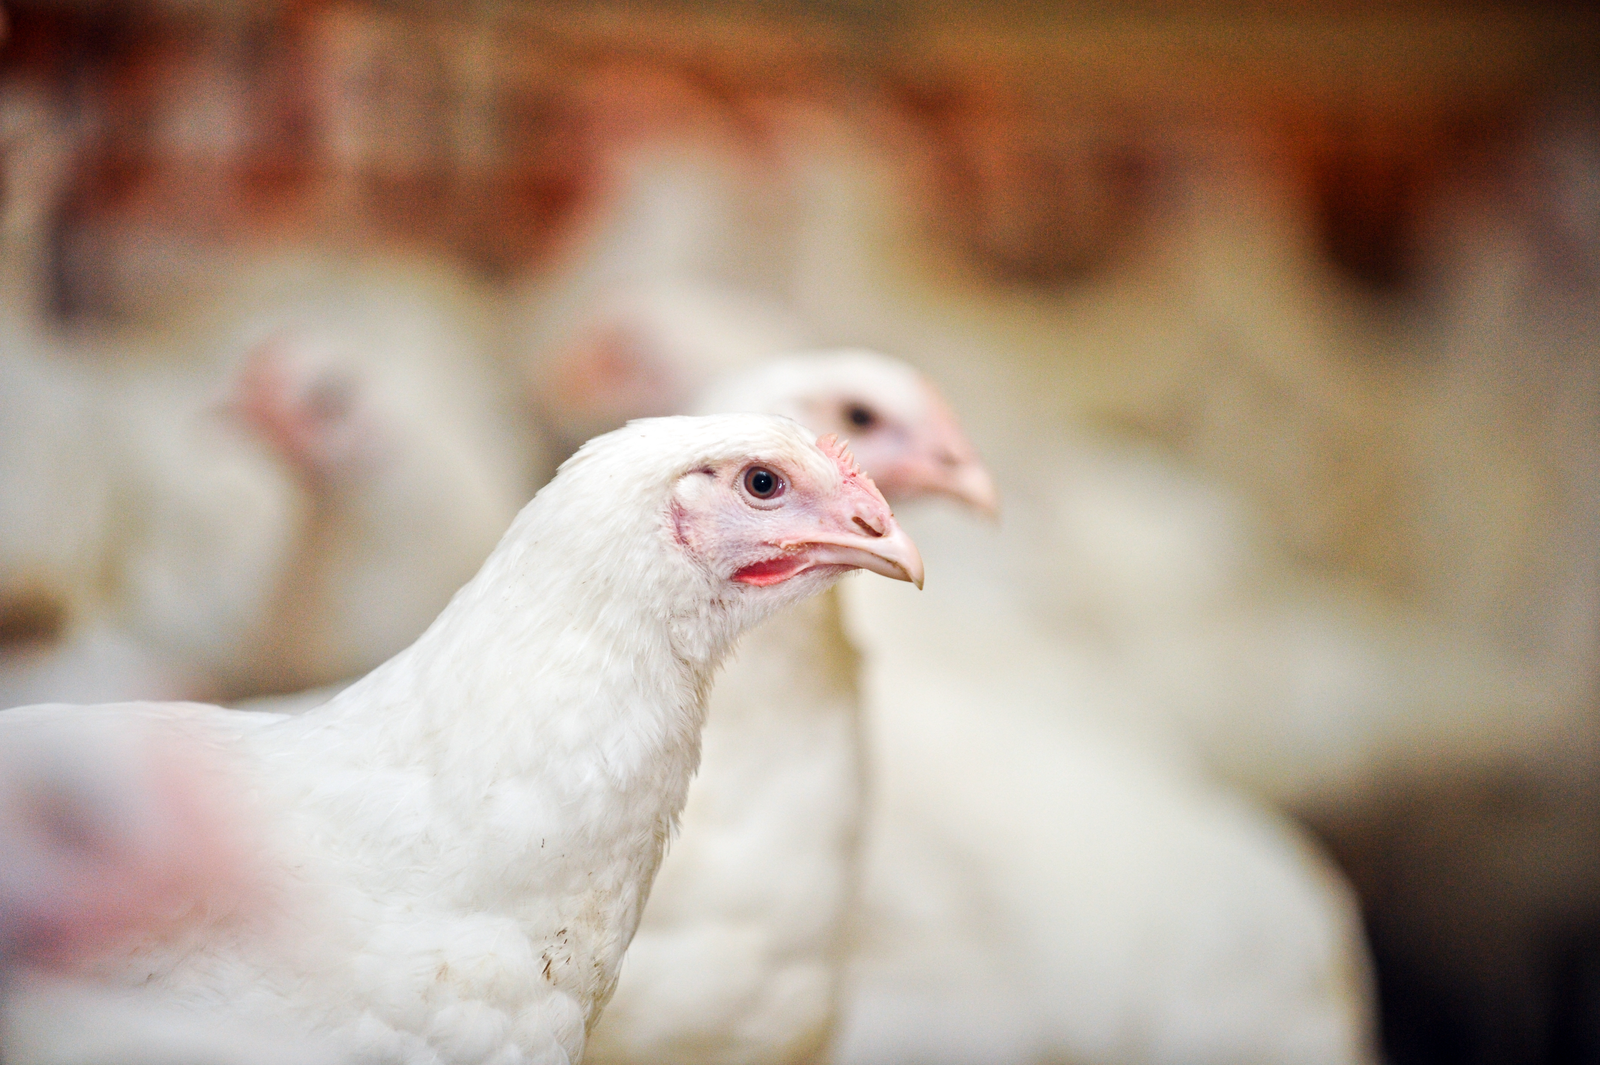 Enyzme combination and microbial tested in broilers